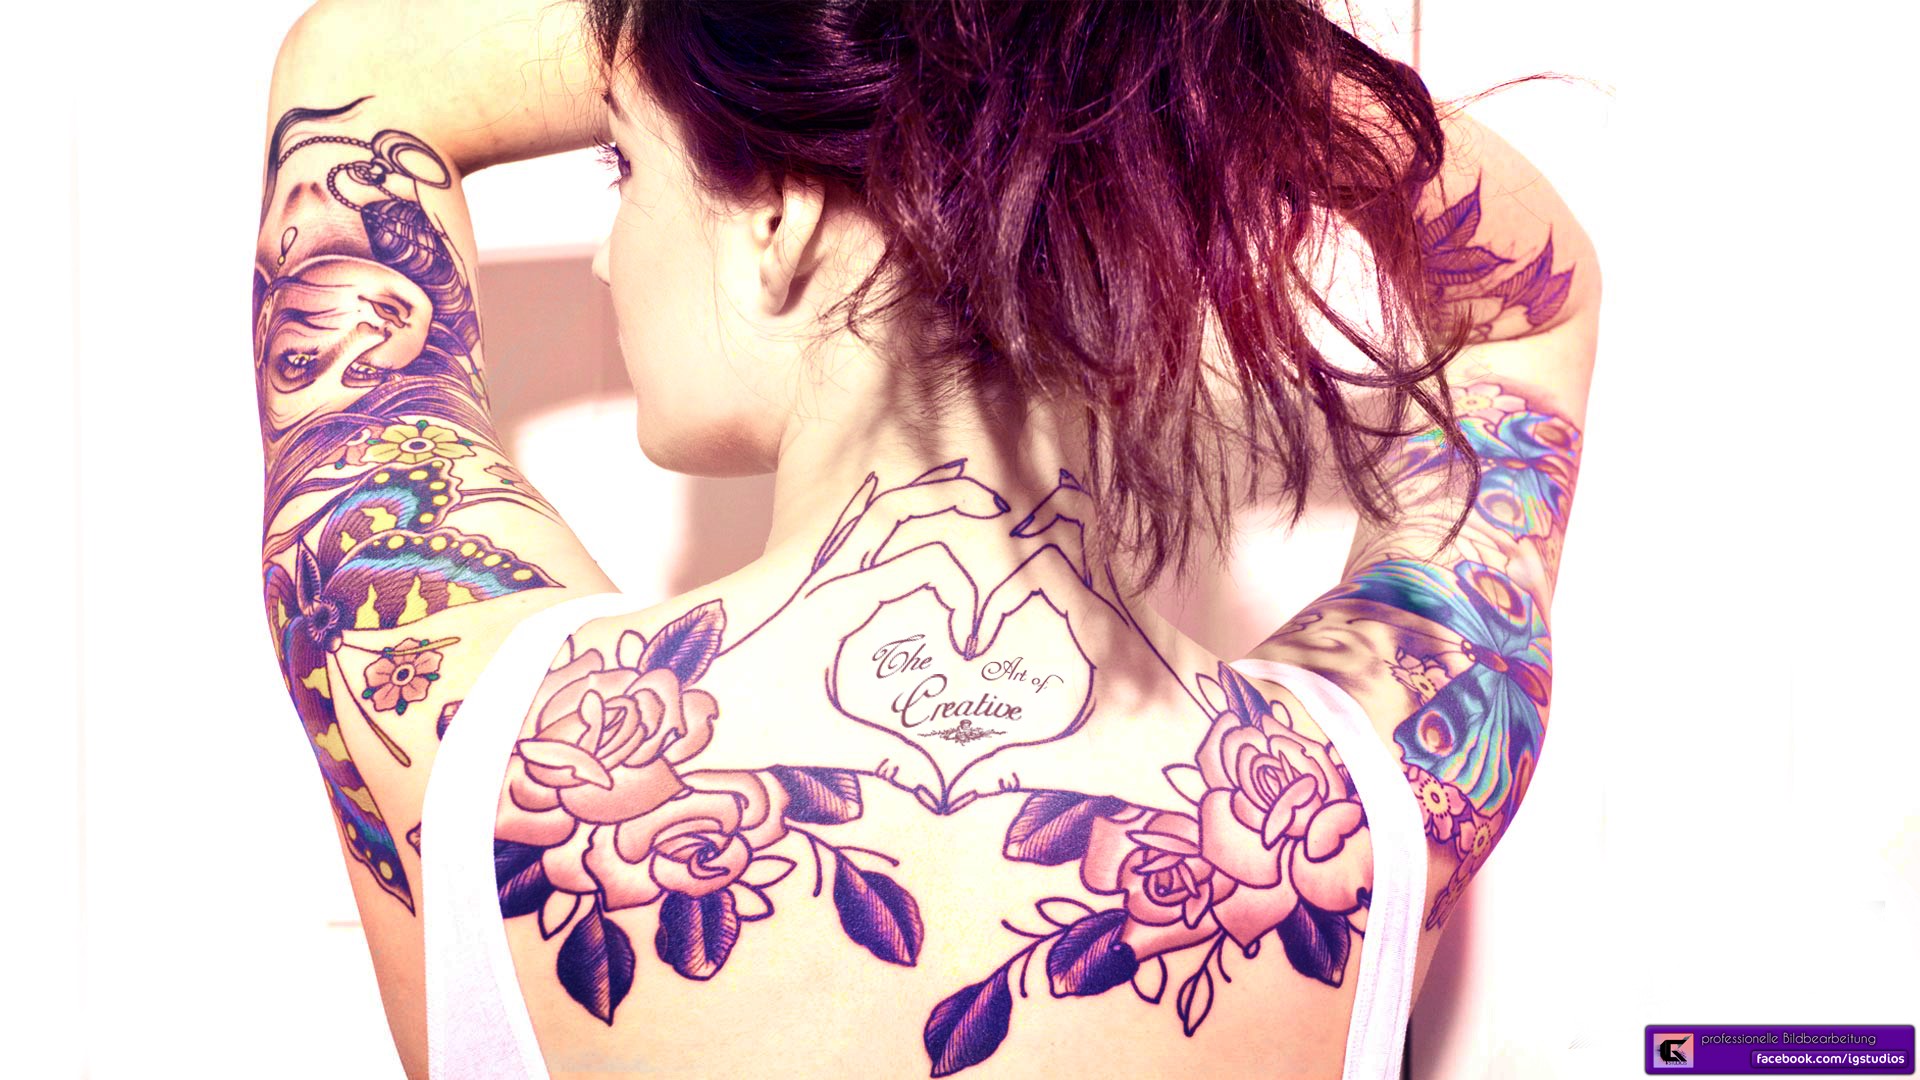 Girl Tattoo Wallpaper for iPhone 11, Pro Max, X, 8, 7, 6 - Free Download on  3Wallpapers